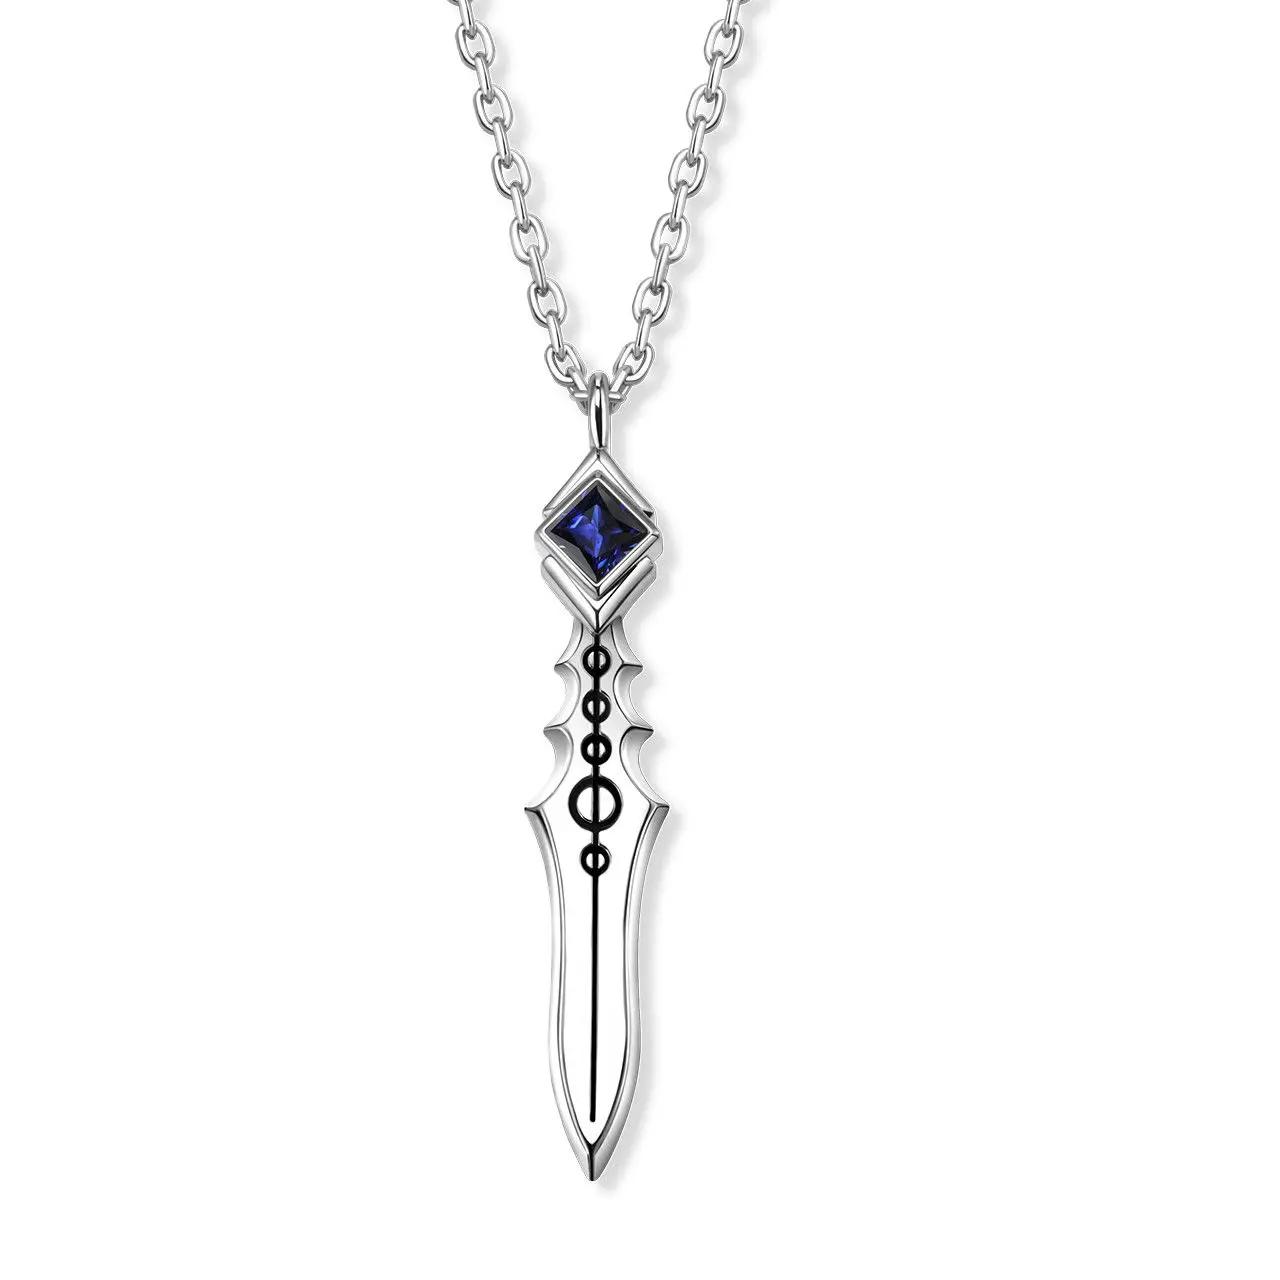 Fate Stay Night Heavens Feel Cosplay Necklace Cuchulainn Gae Bolg Necklace Choker Pendants Halloween Costume Accesso